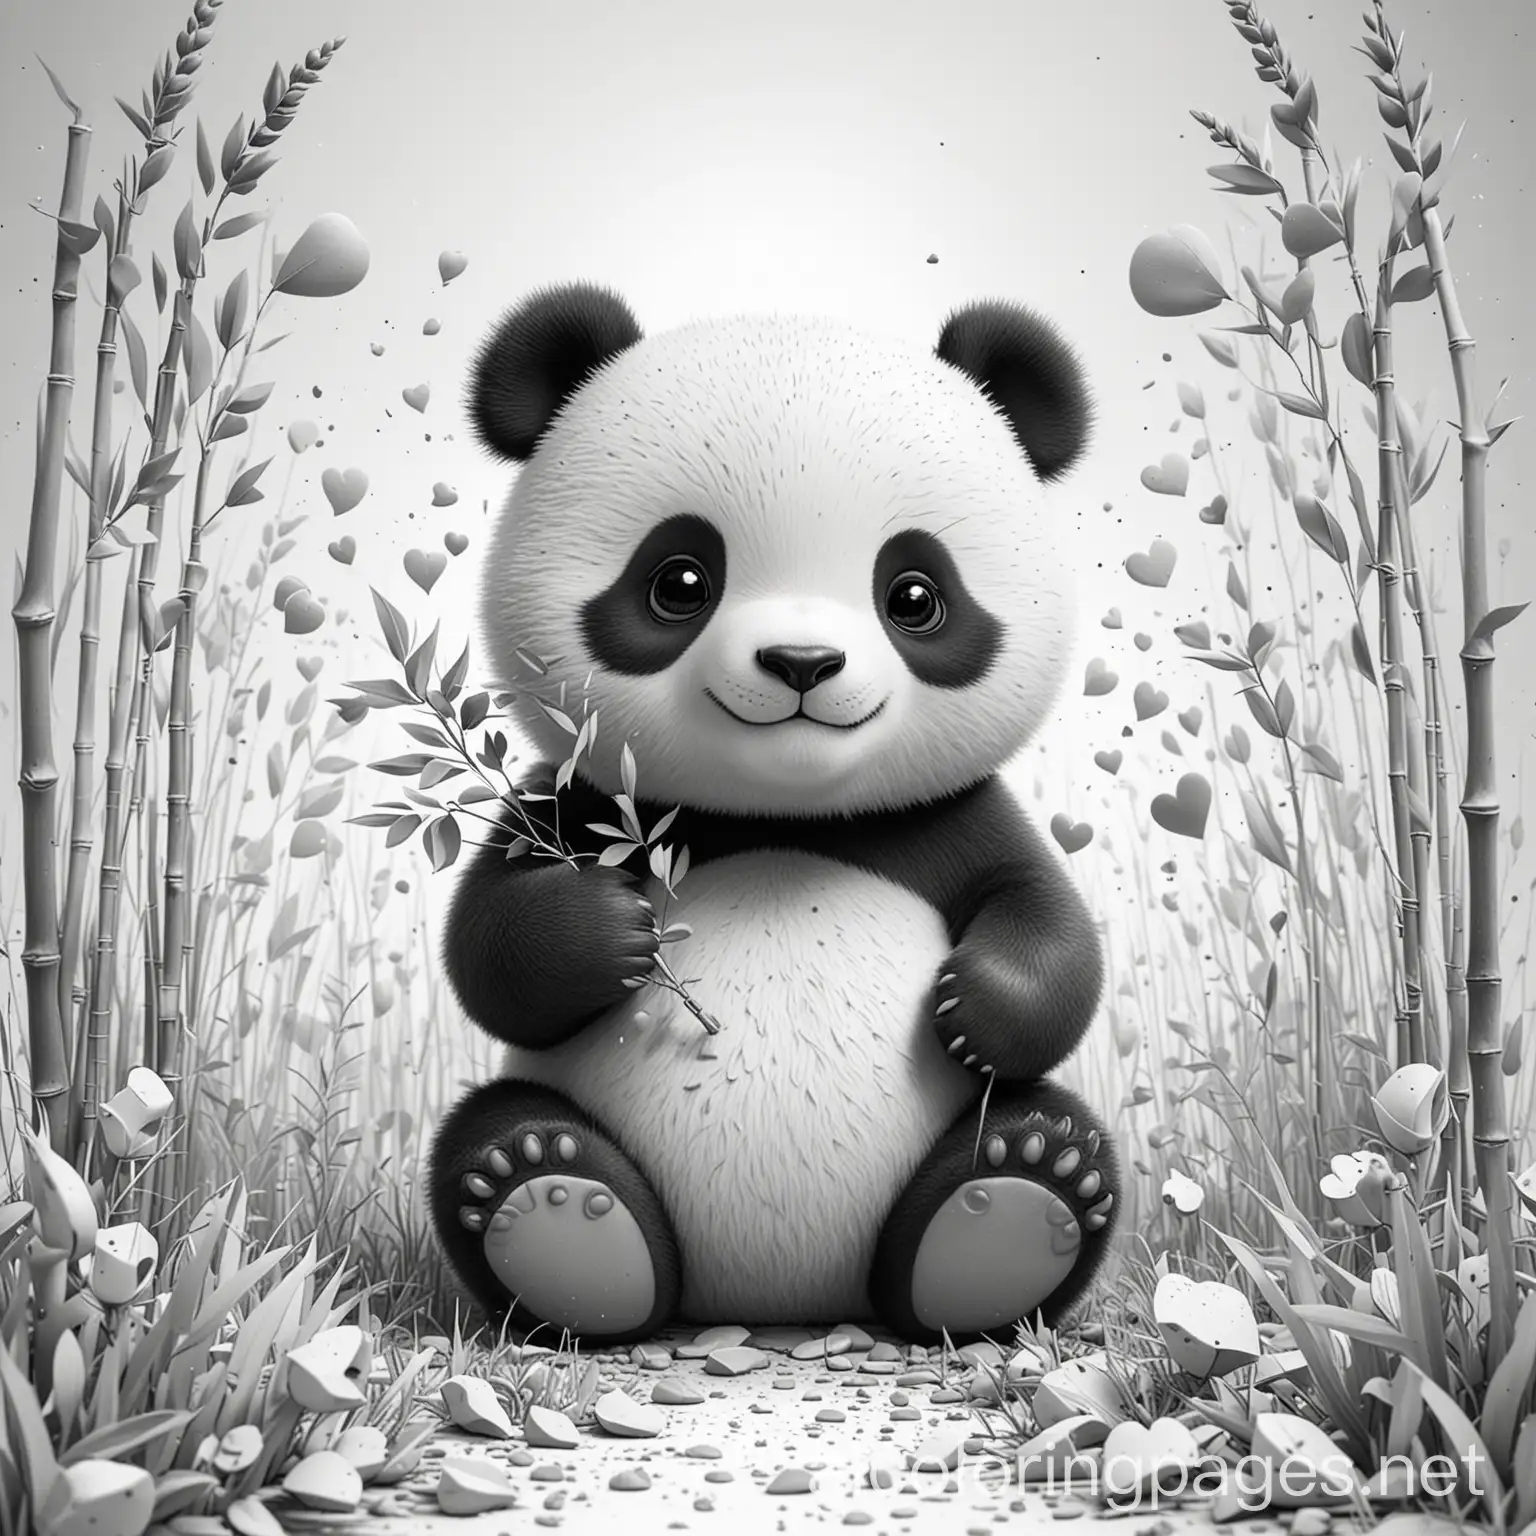 An enchanting artwork of a kawaii panda holding a bamboo shoot amidst a field of scattered hearts, Coloring Page, black and white, line art, white background, Simplicity, Ample White Space. The background of the coloring page is plain white to make it easy for young children to color within the lines. The outlines of all the subjects are easy to distinguish, making it simple for kids to color without too much difficulty